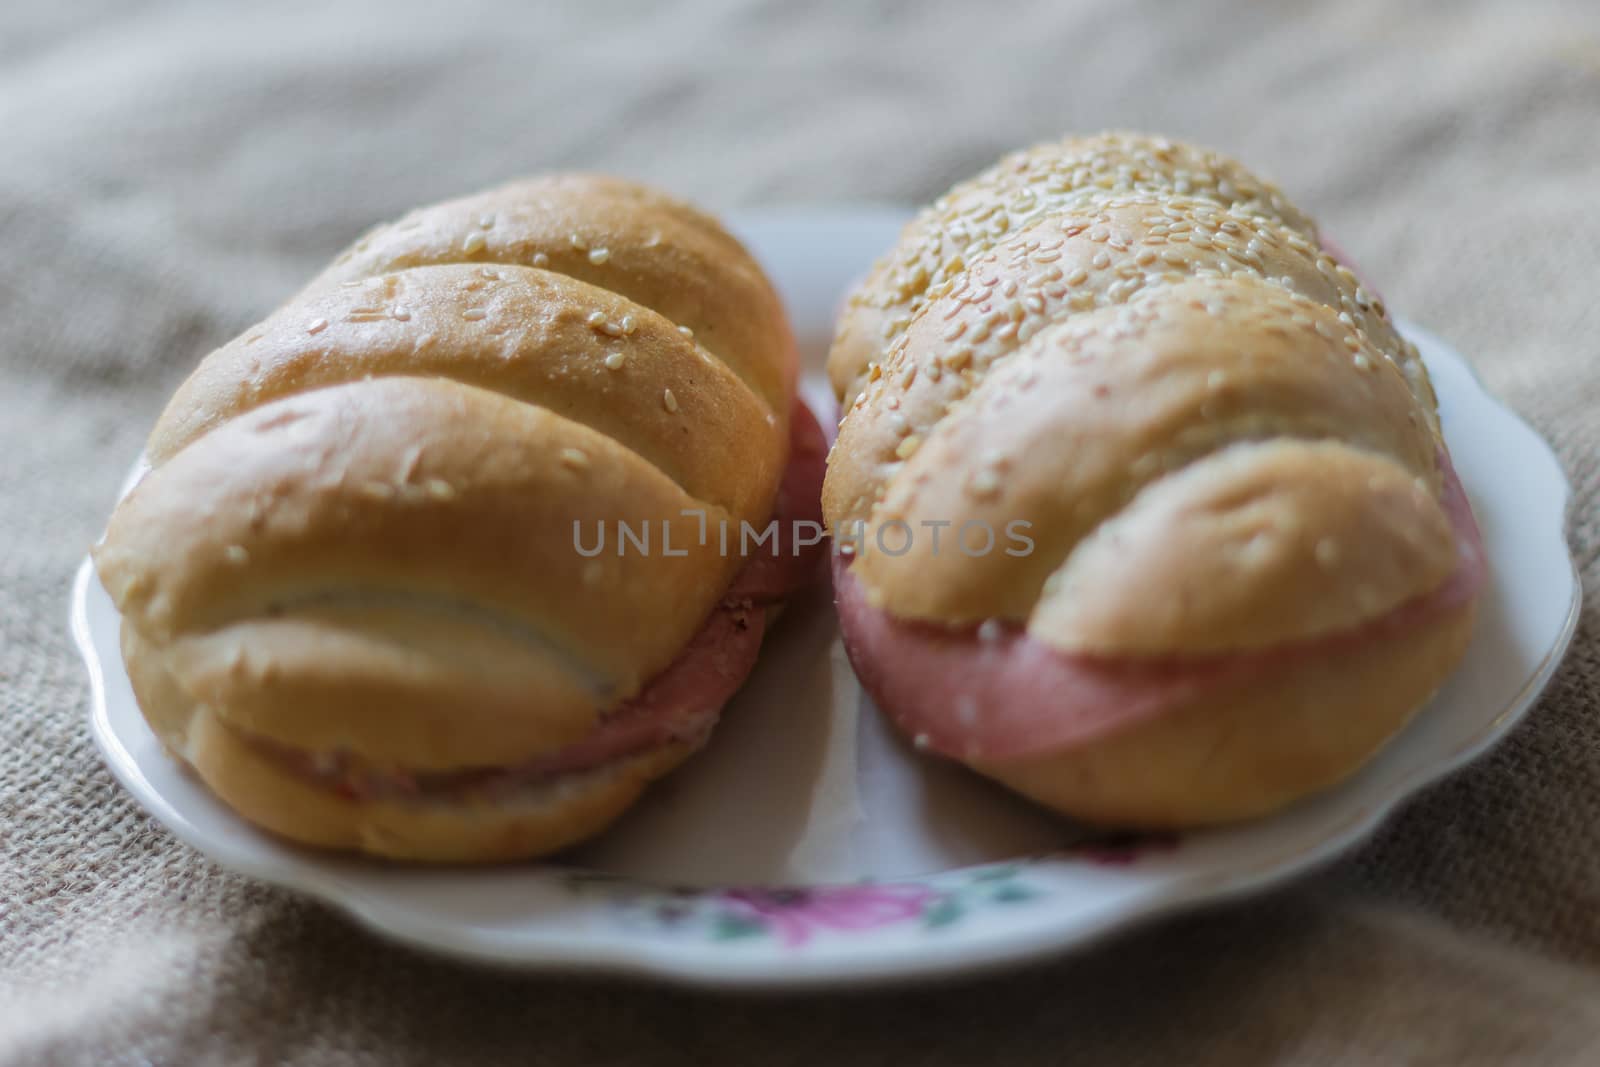 buns on the plate on a light blurred background